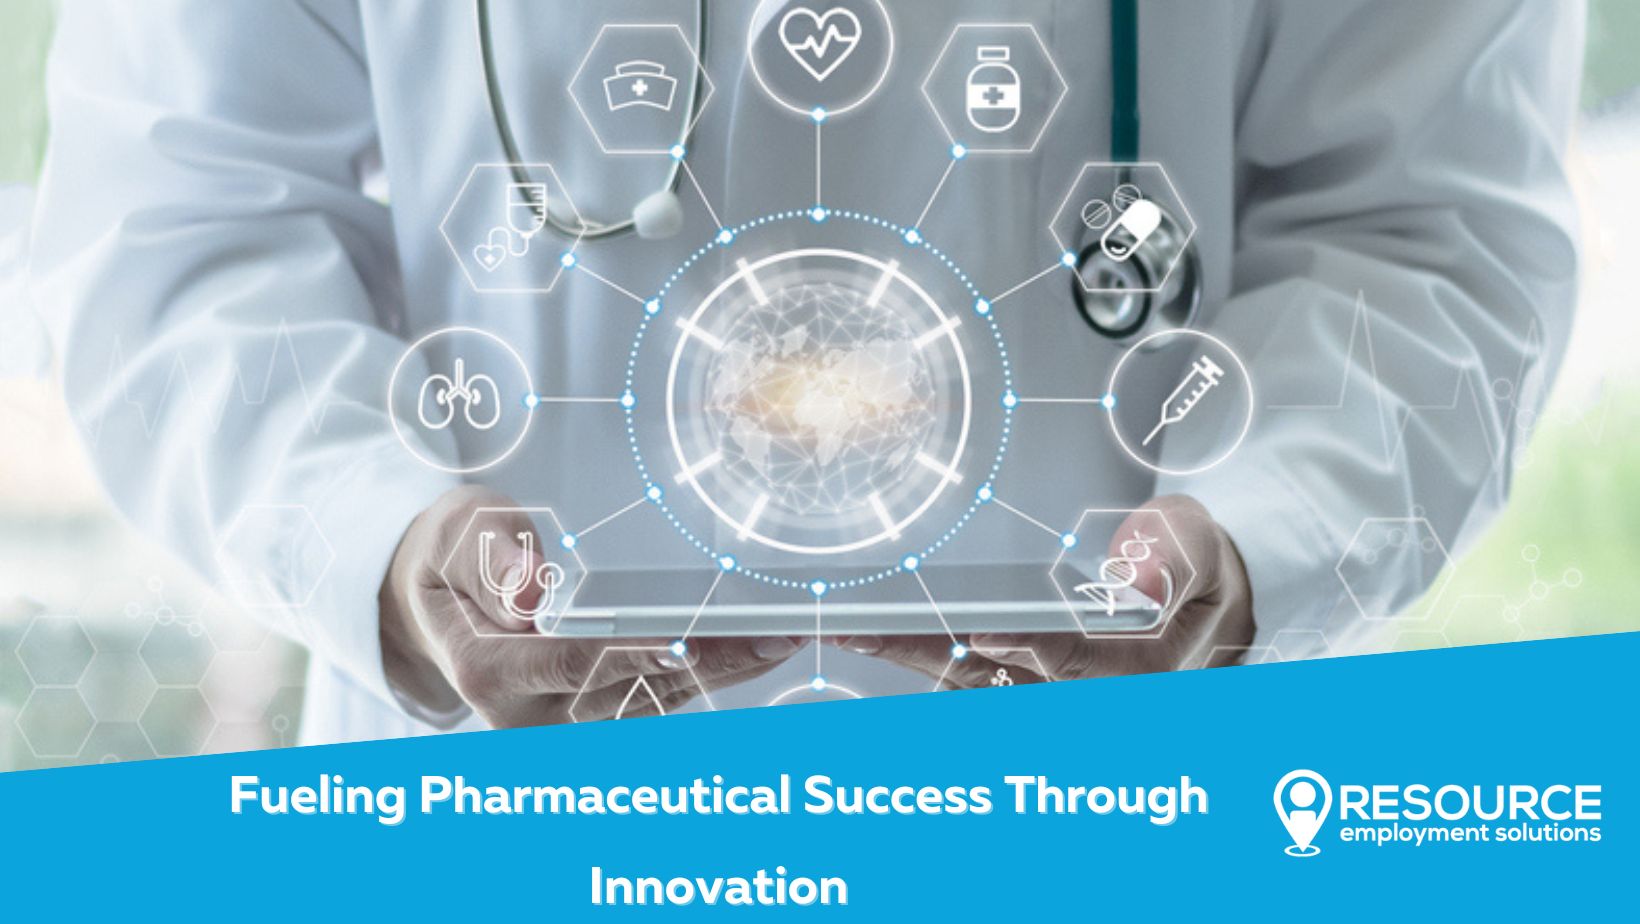 Fueling Pharmaceutical Success Through Innovation: The Resource Employment Solutions Advantage